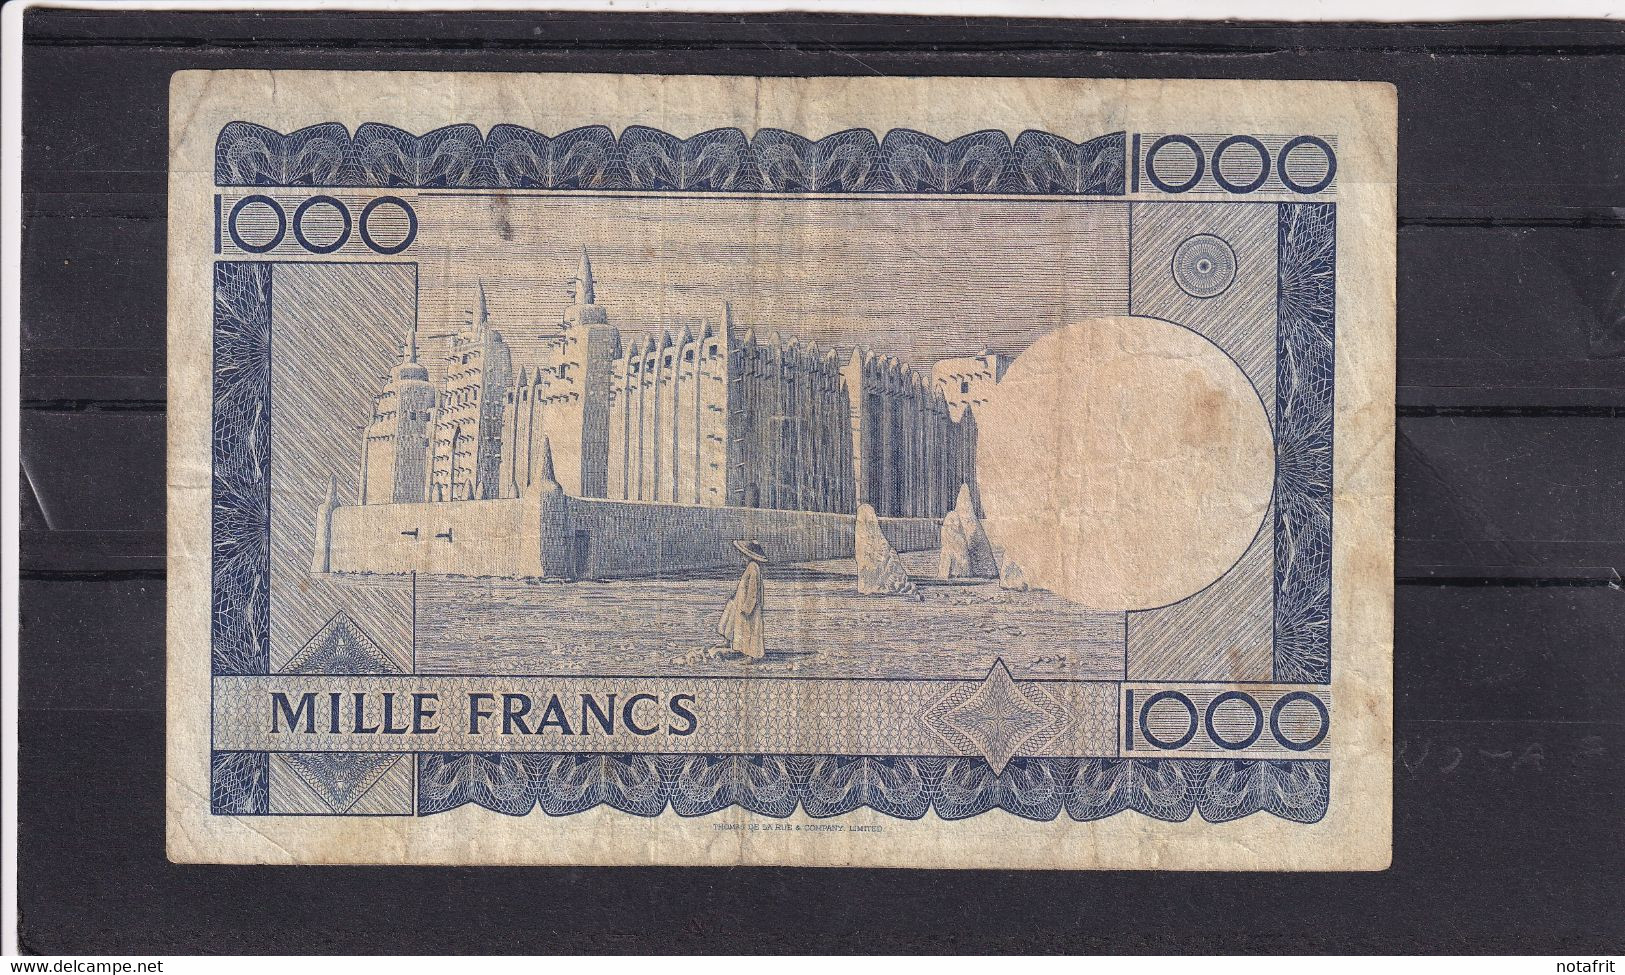 Mali 1000 Fr   2nd Issue  Fine - West African States